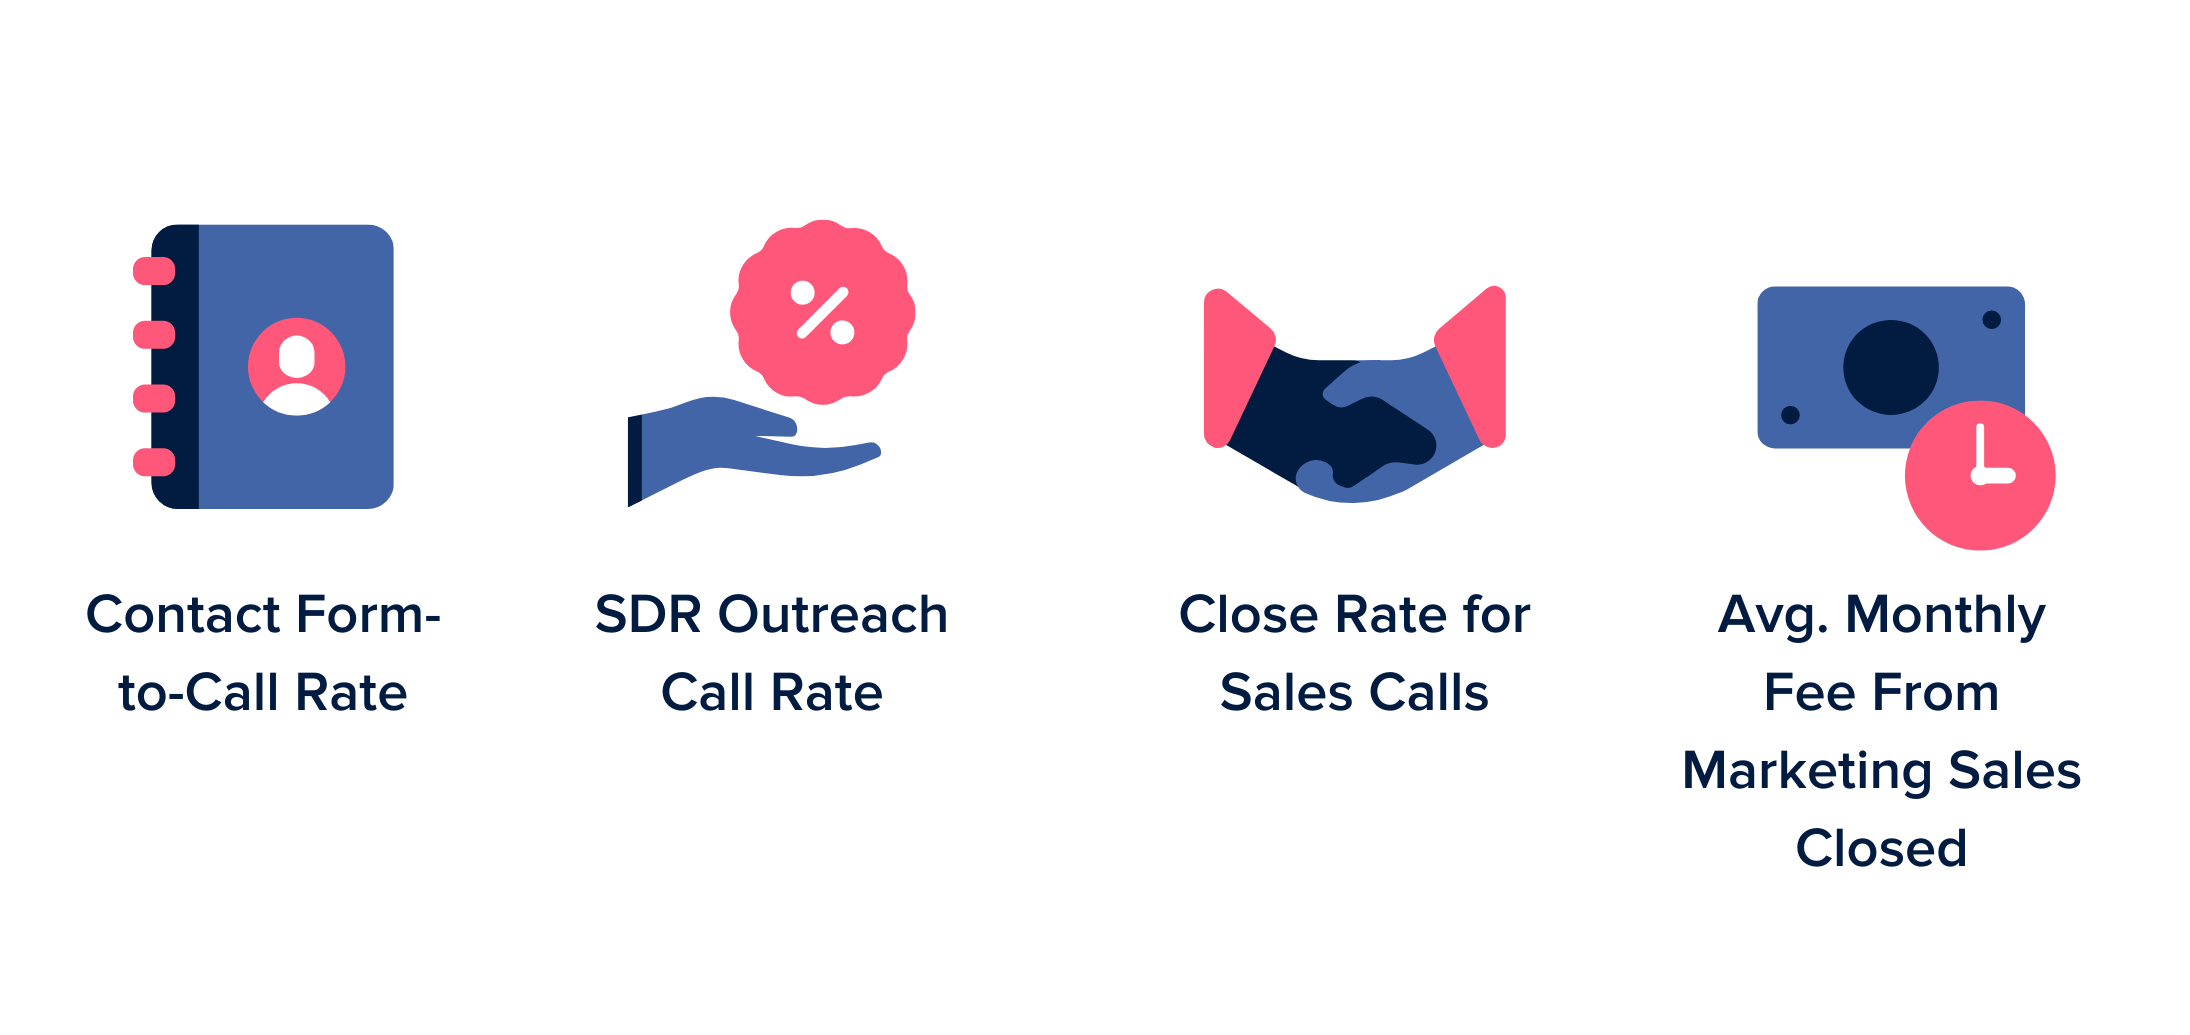 Influence & Co. increased contact form-to-call rate, SDR outreach call rate, close rate for sales calls, and average monthly fee from marketing sales closed